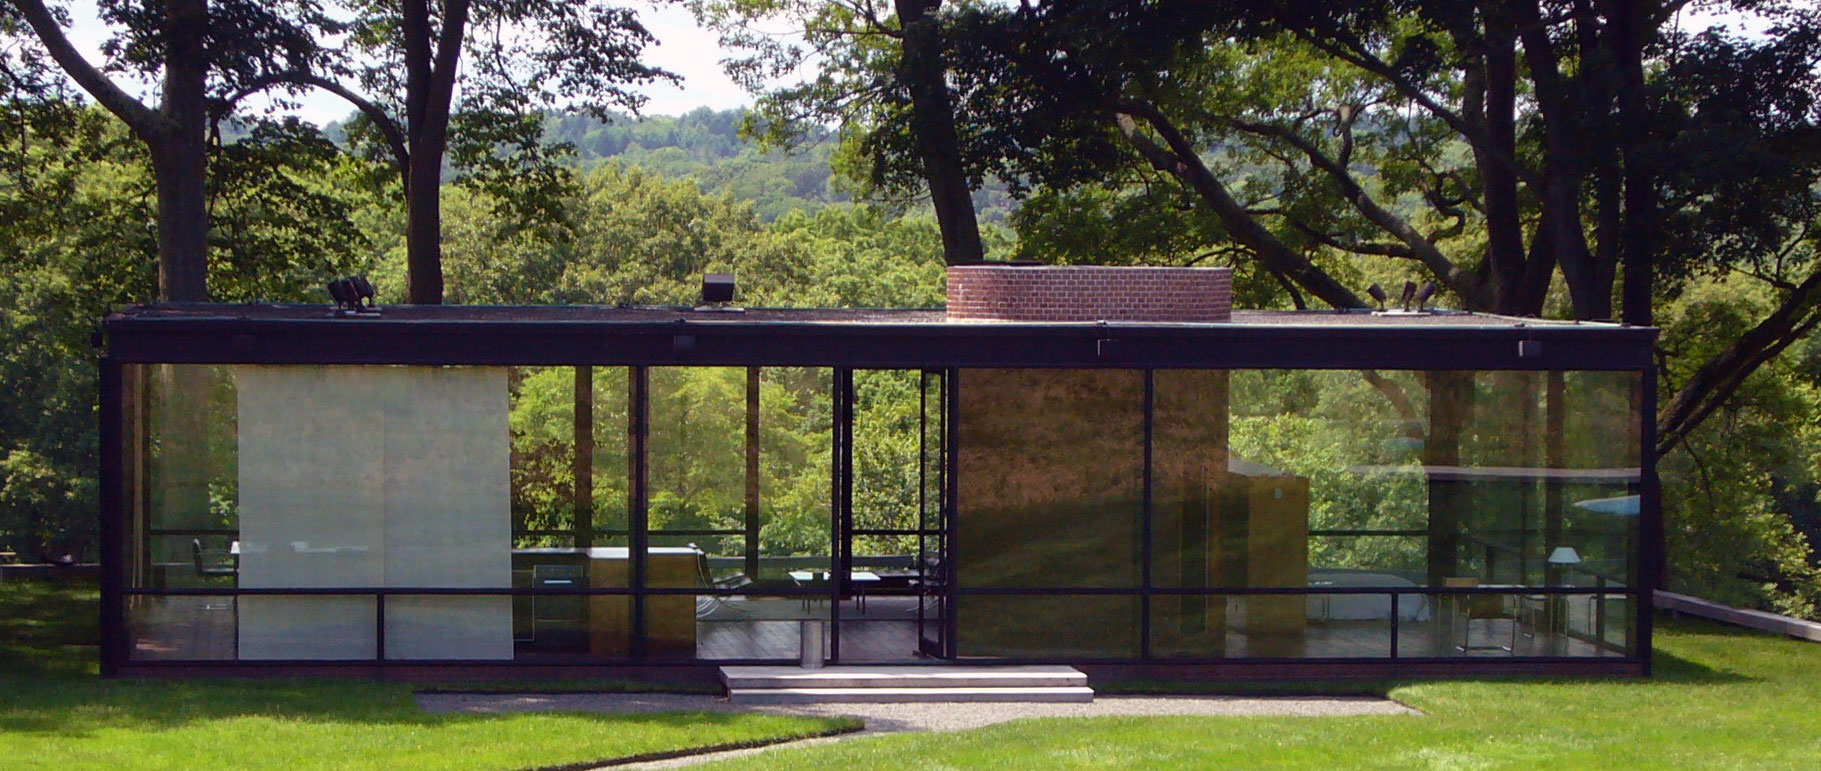 Philip Johnson S Glass House Inside And Out Architecture